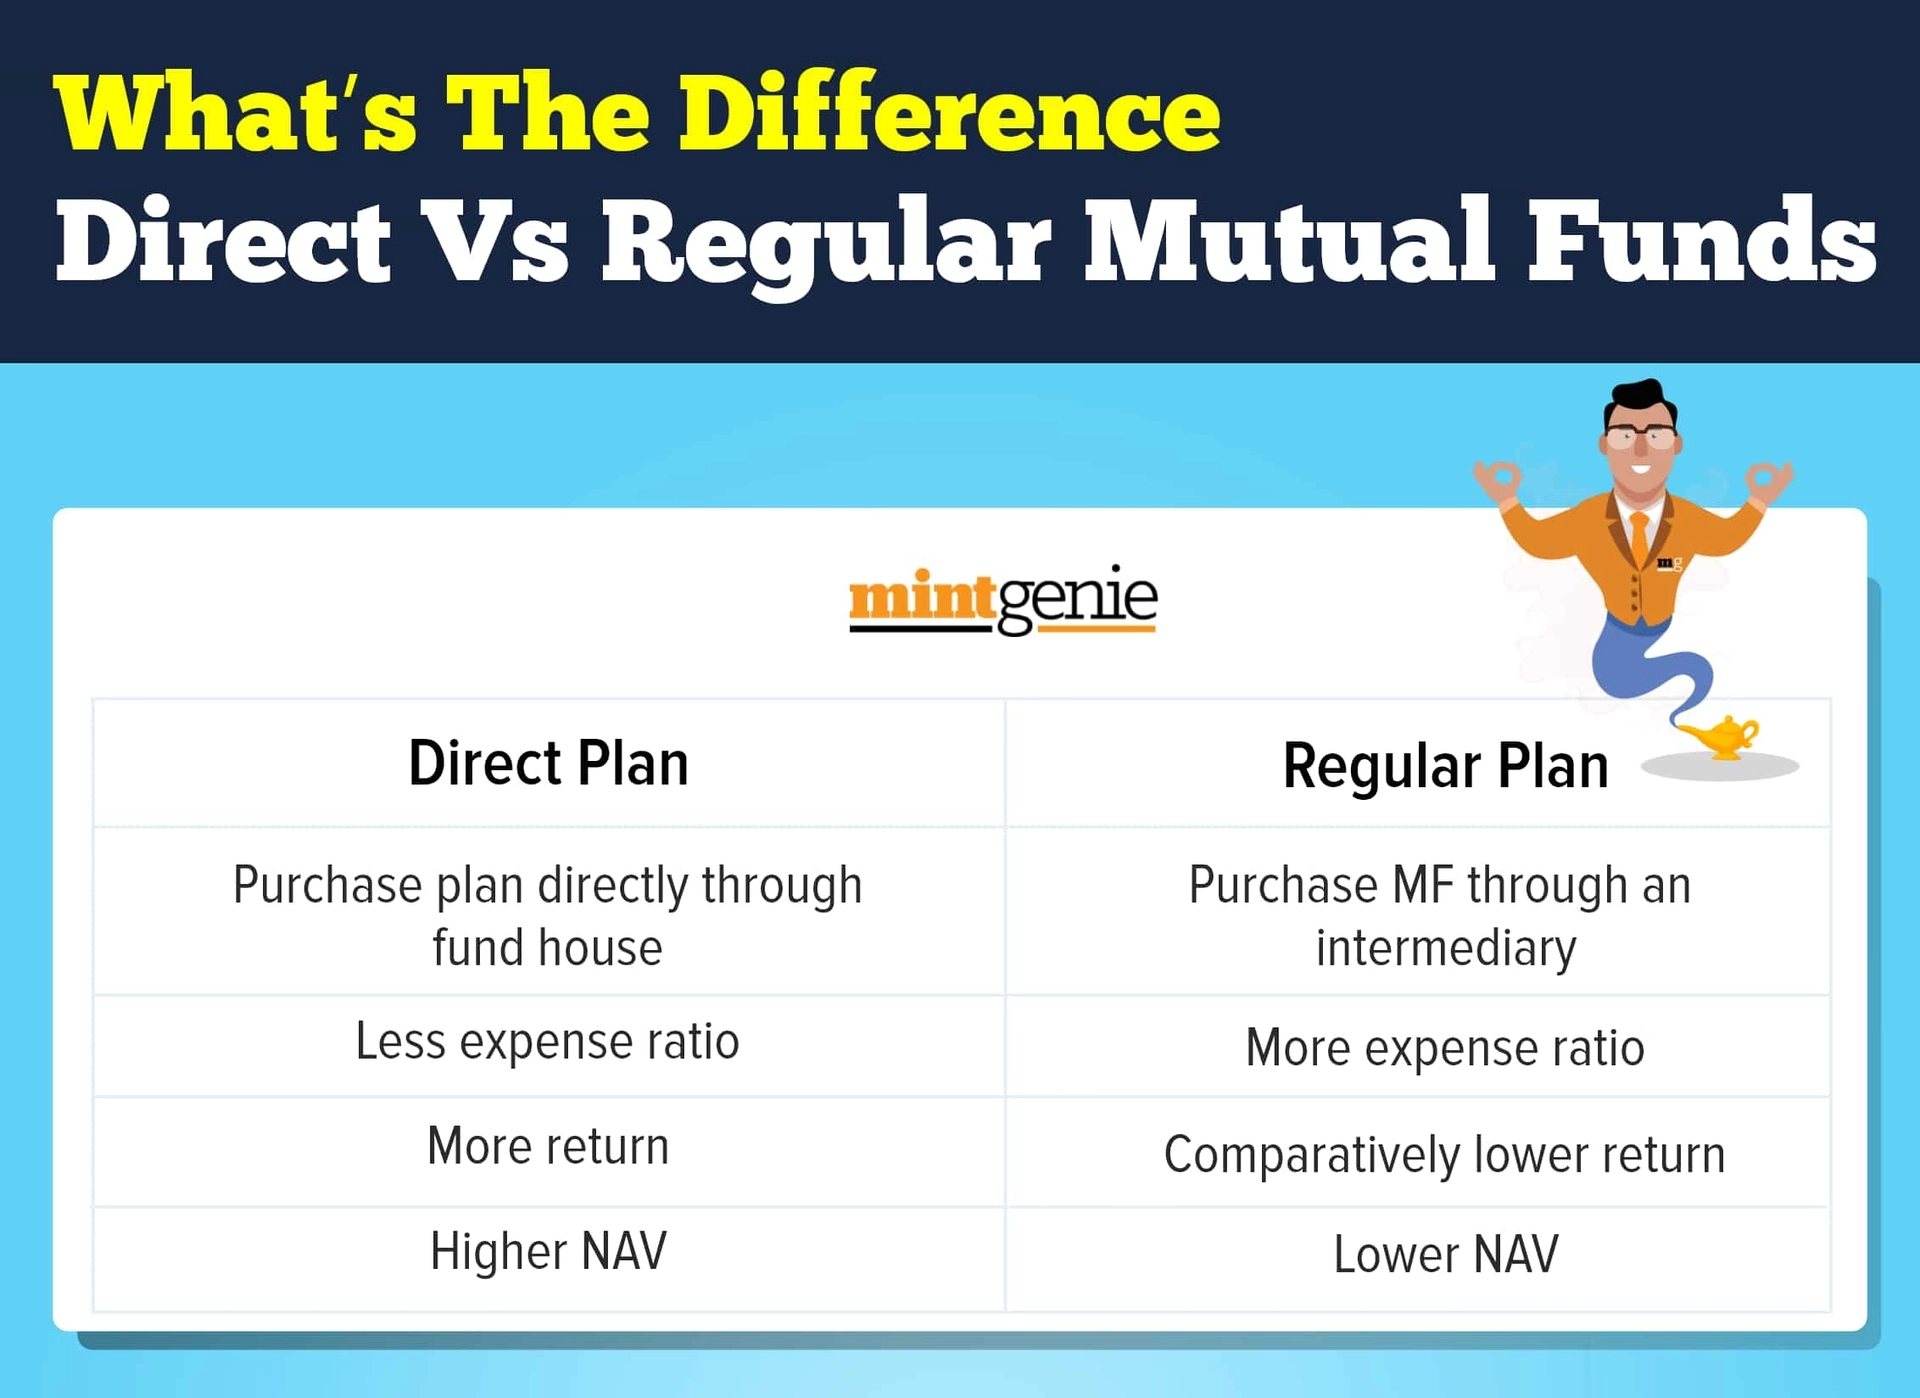 Key differences between direct and regular mutual fund plans